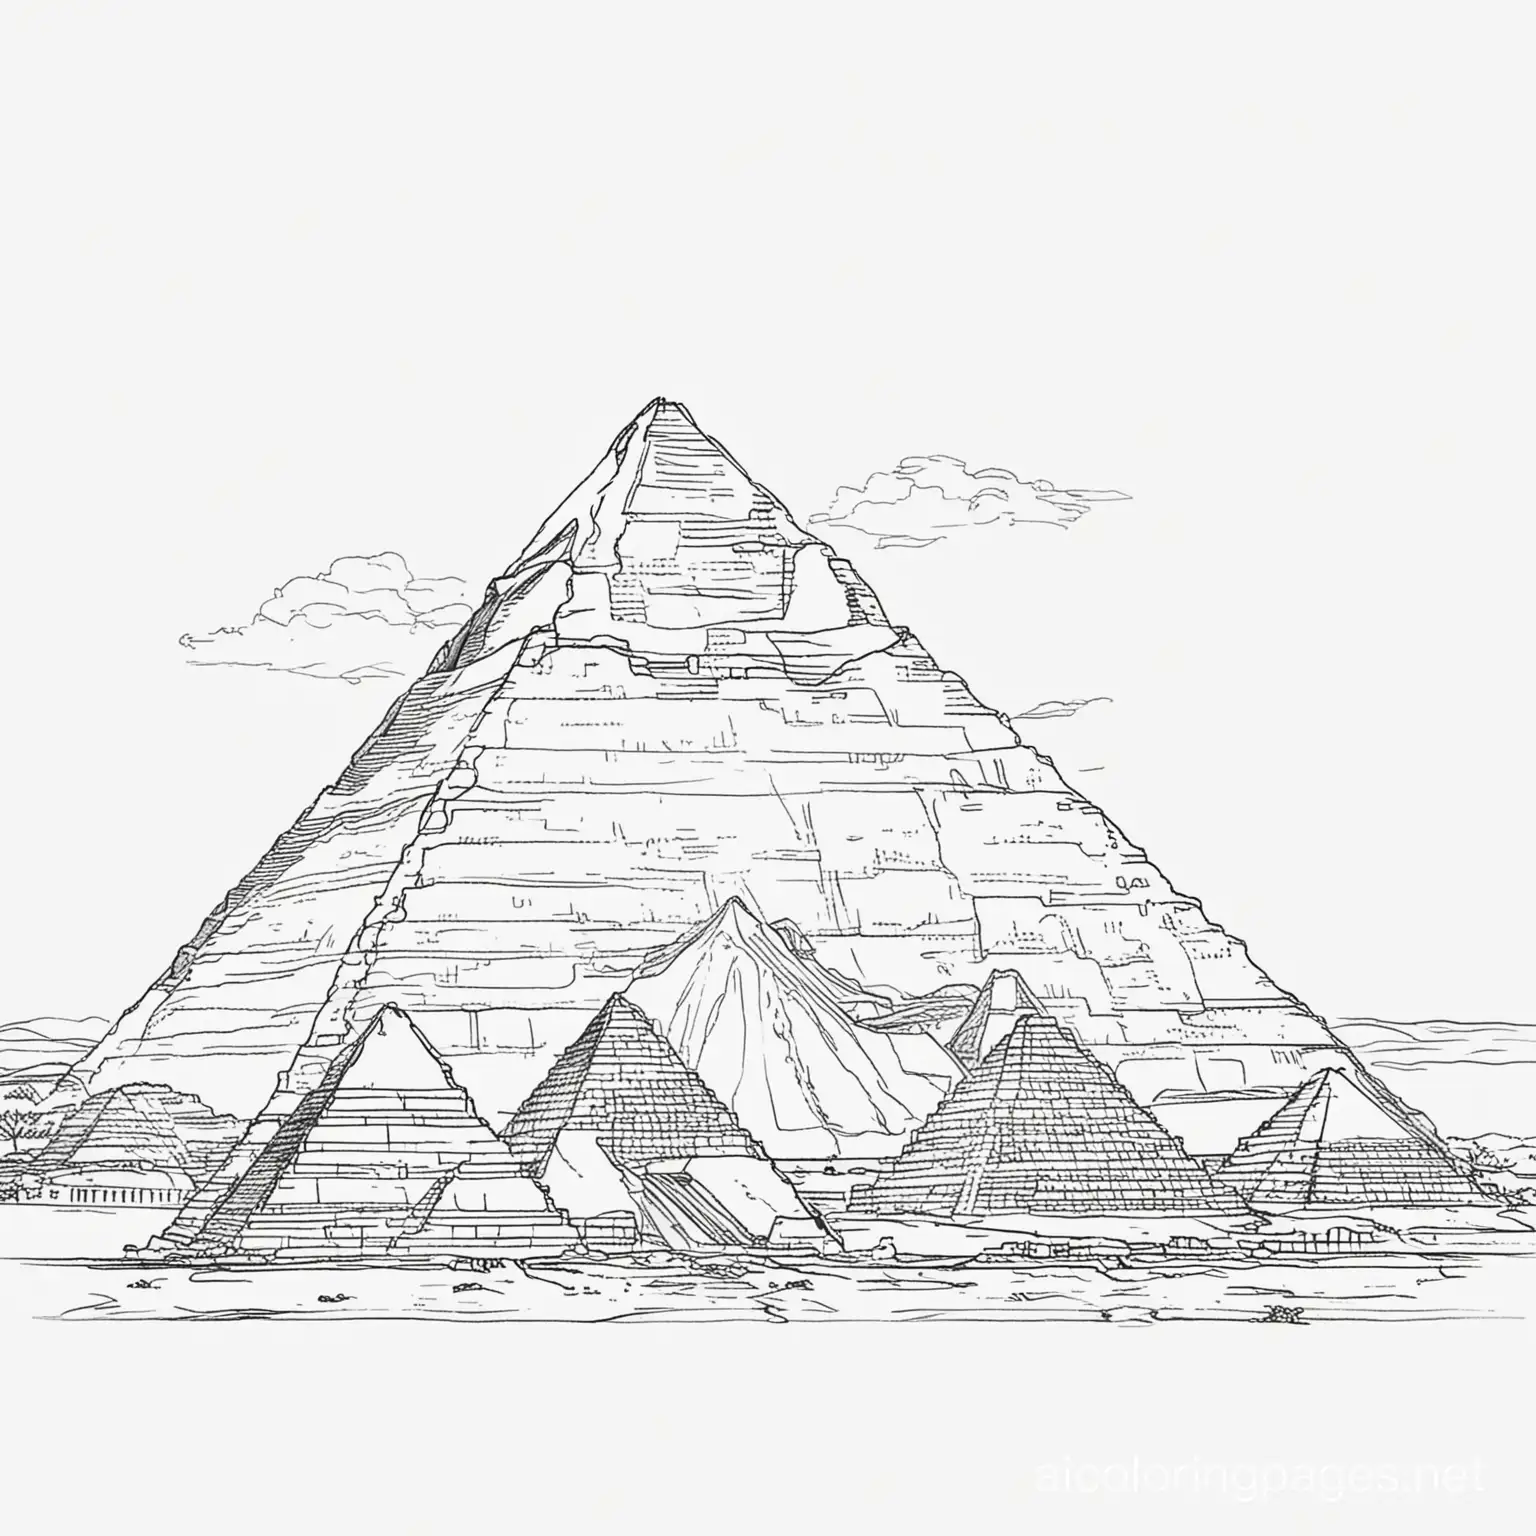 Great Pyramid of Giza: Located in Egypt, the Great Pyramid of Giza is the oldest and only surviving wonder. It was built as a tomb for Pharaoh Khufu around 2560 BCE. Its precise construction methods remain a mystery., Coloring Page, black and white, line art, white background, Simplicity, Ample White Space. The background of the coloring page is plain white to make it easy for young children to color within the lines. The outlines of all the subjects are easy to distinguish, making it simple for kids to color without too much difficulty